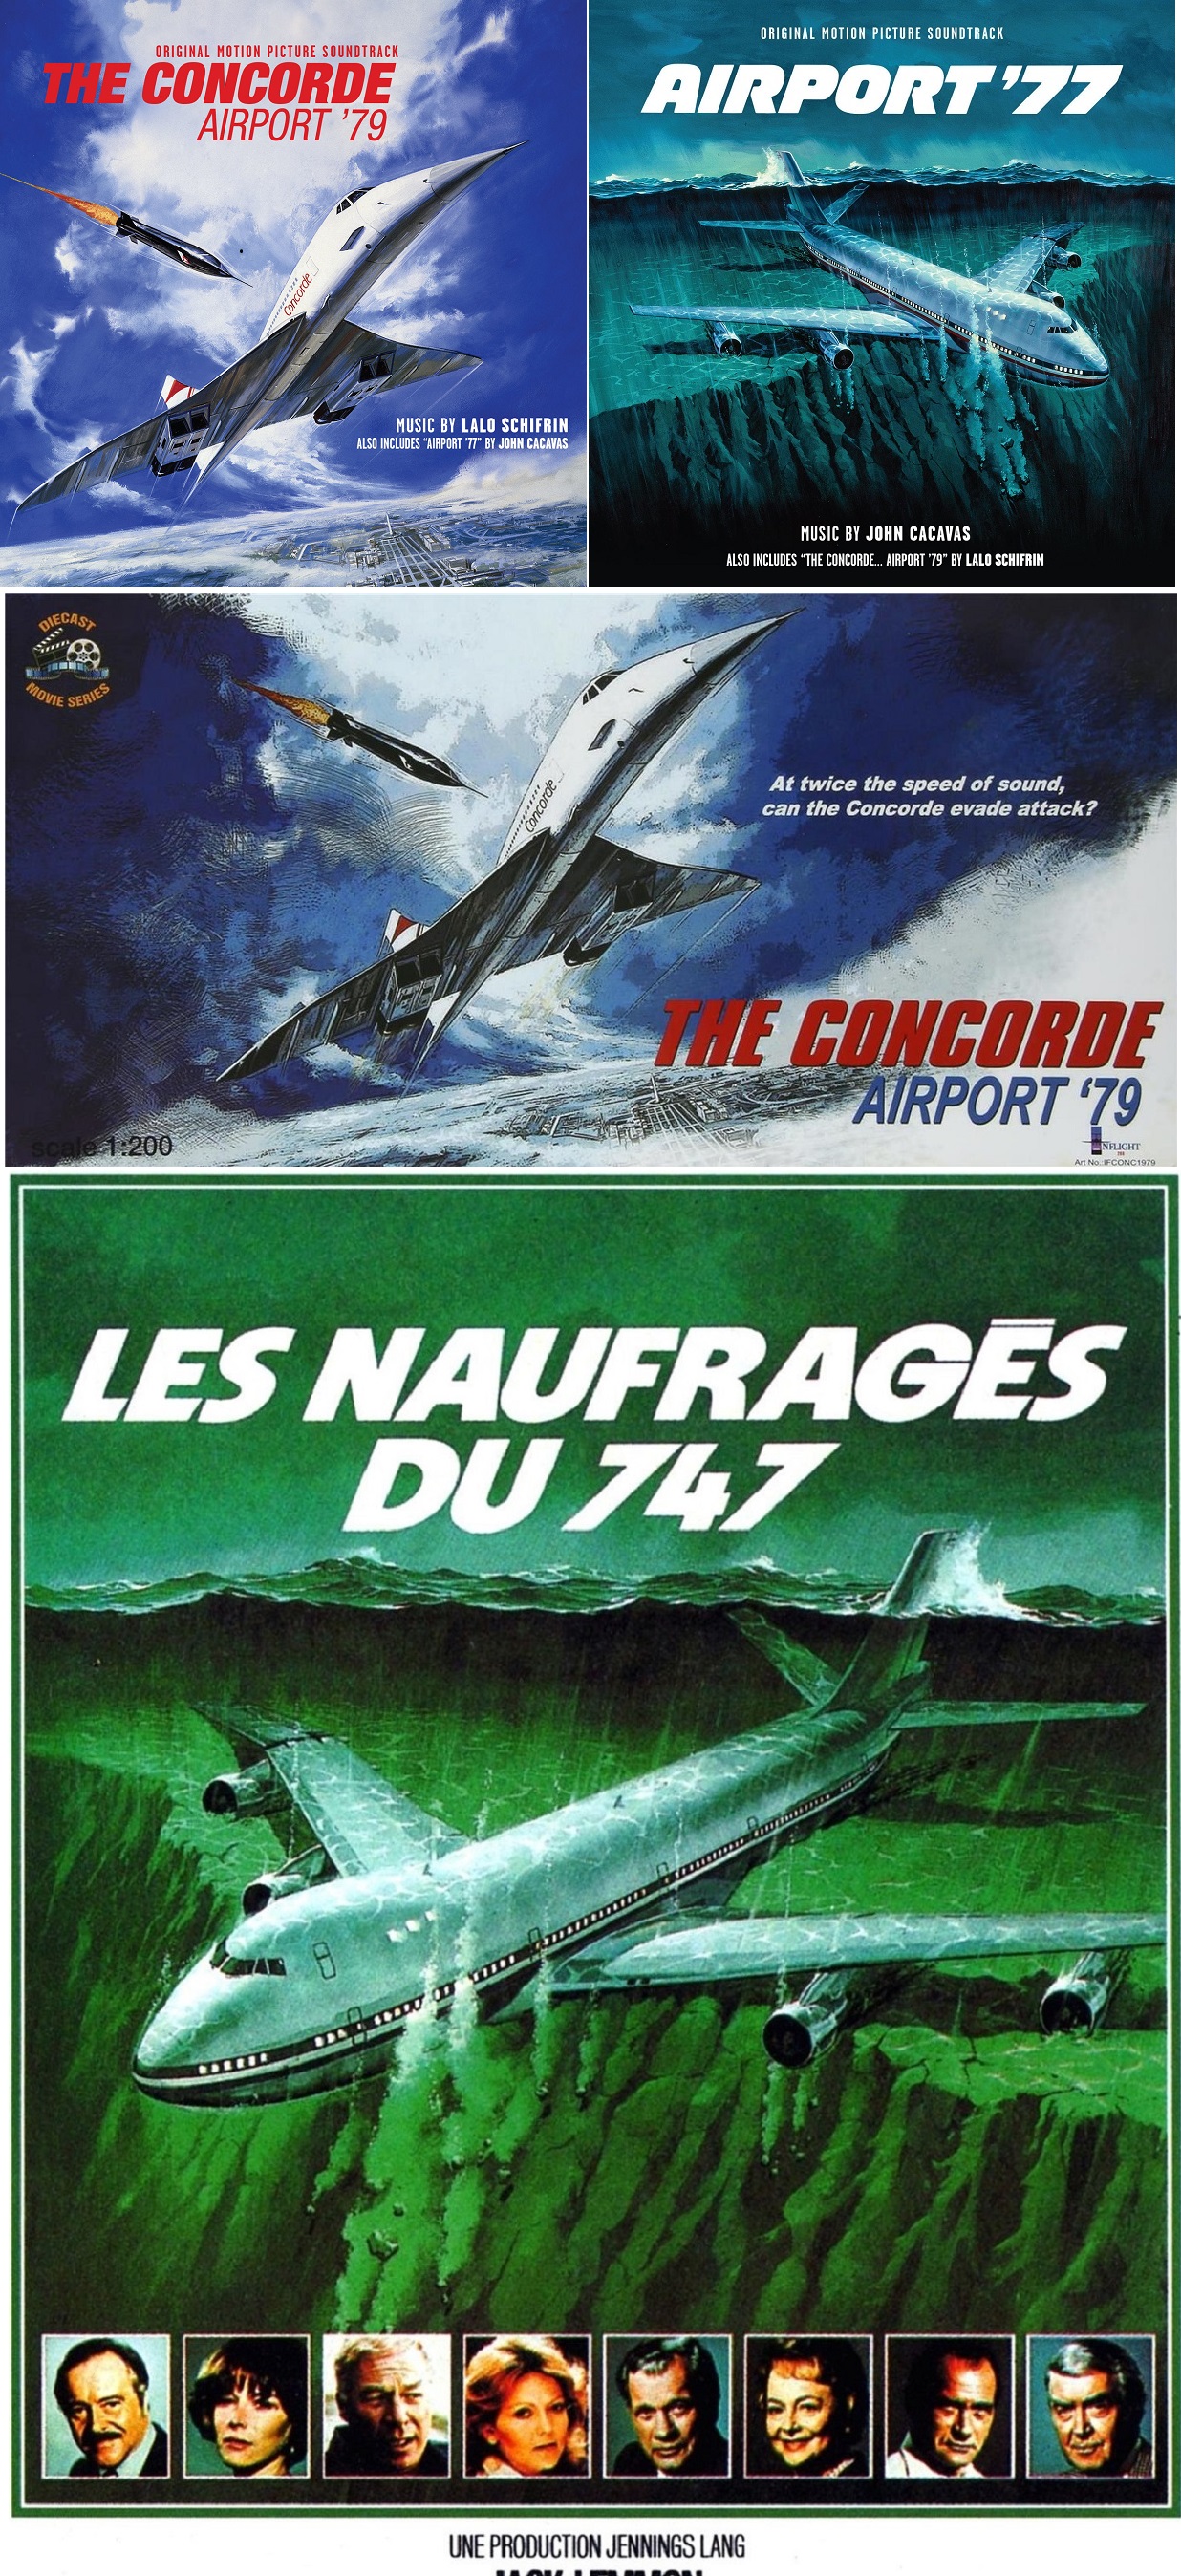 Les Naufrags du 747 / Airport 80 Concorde (Airport '77 / The Concorde...Airport '79)